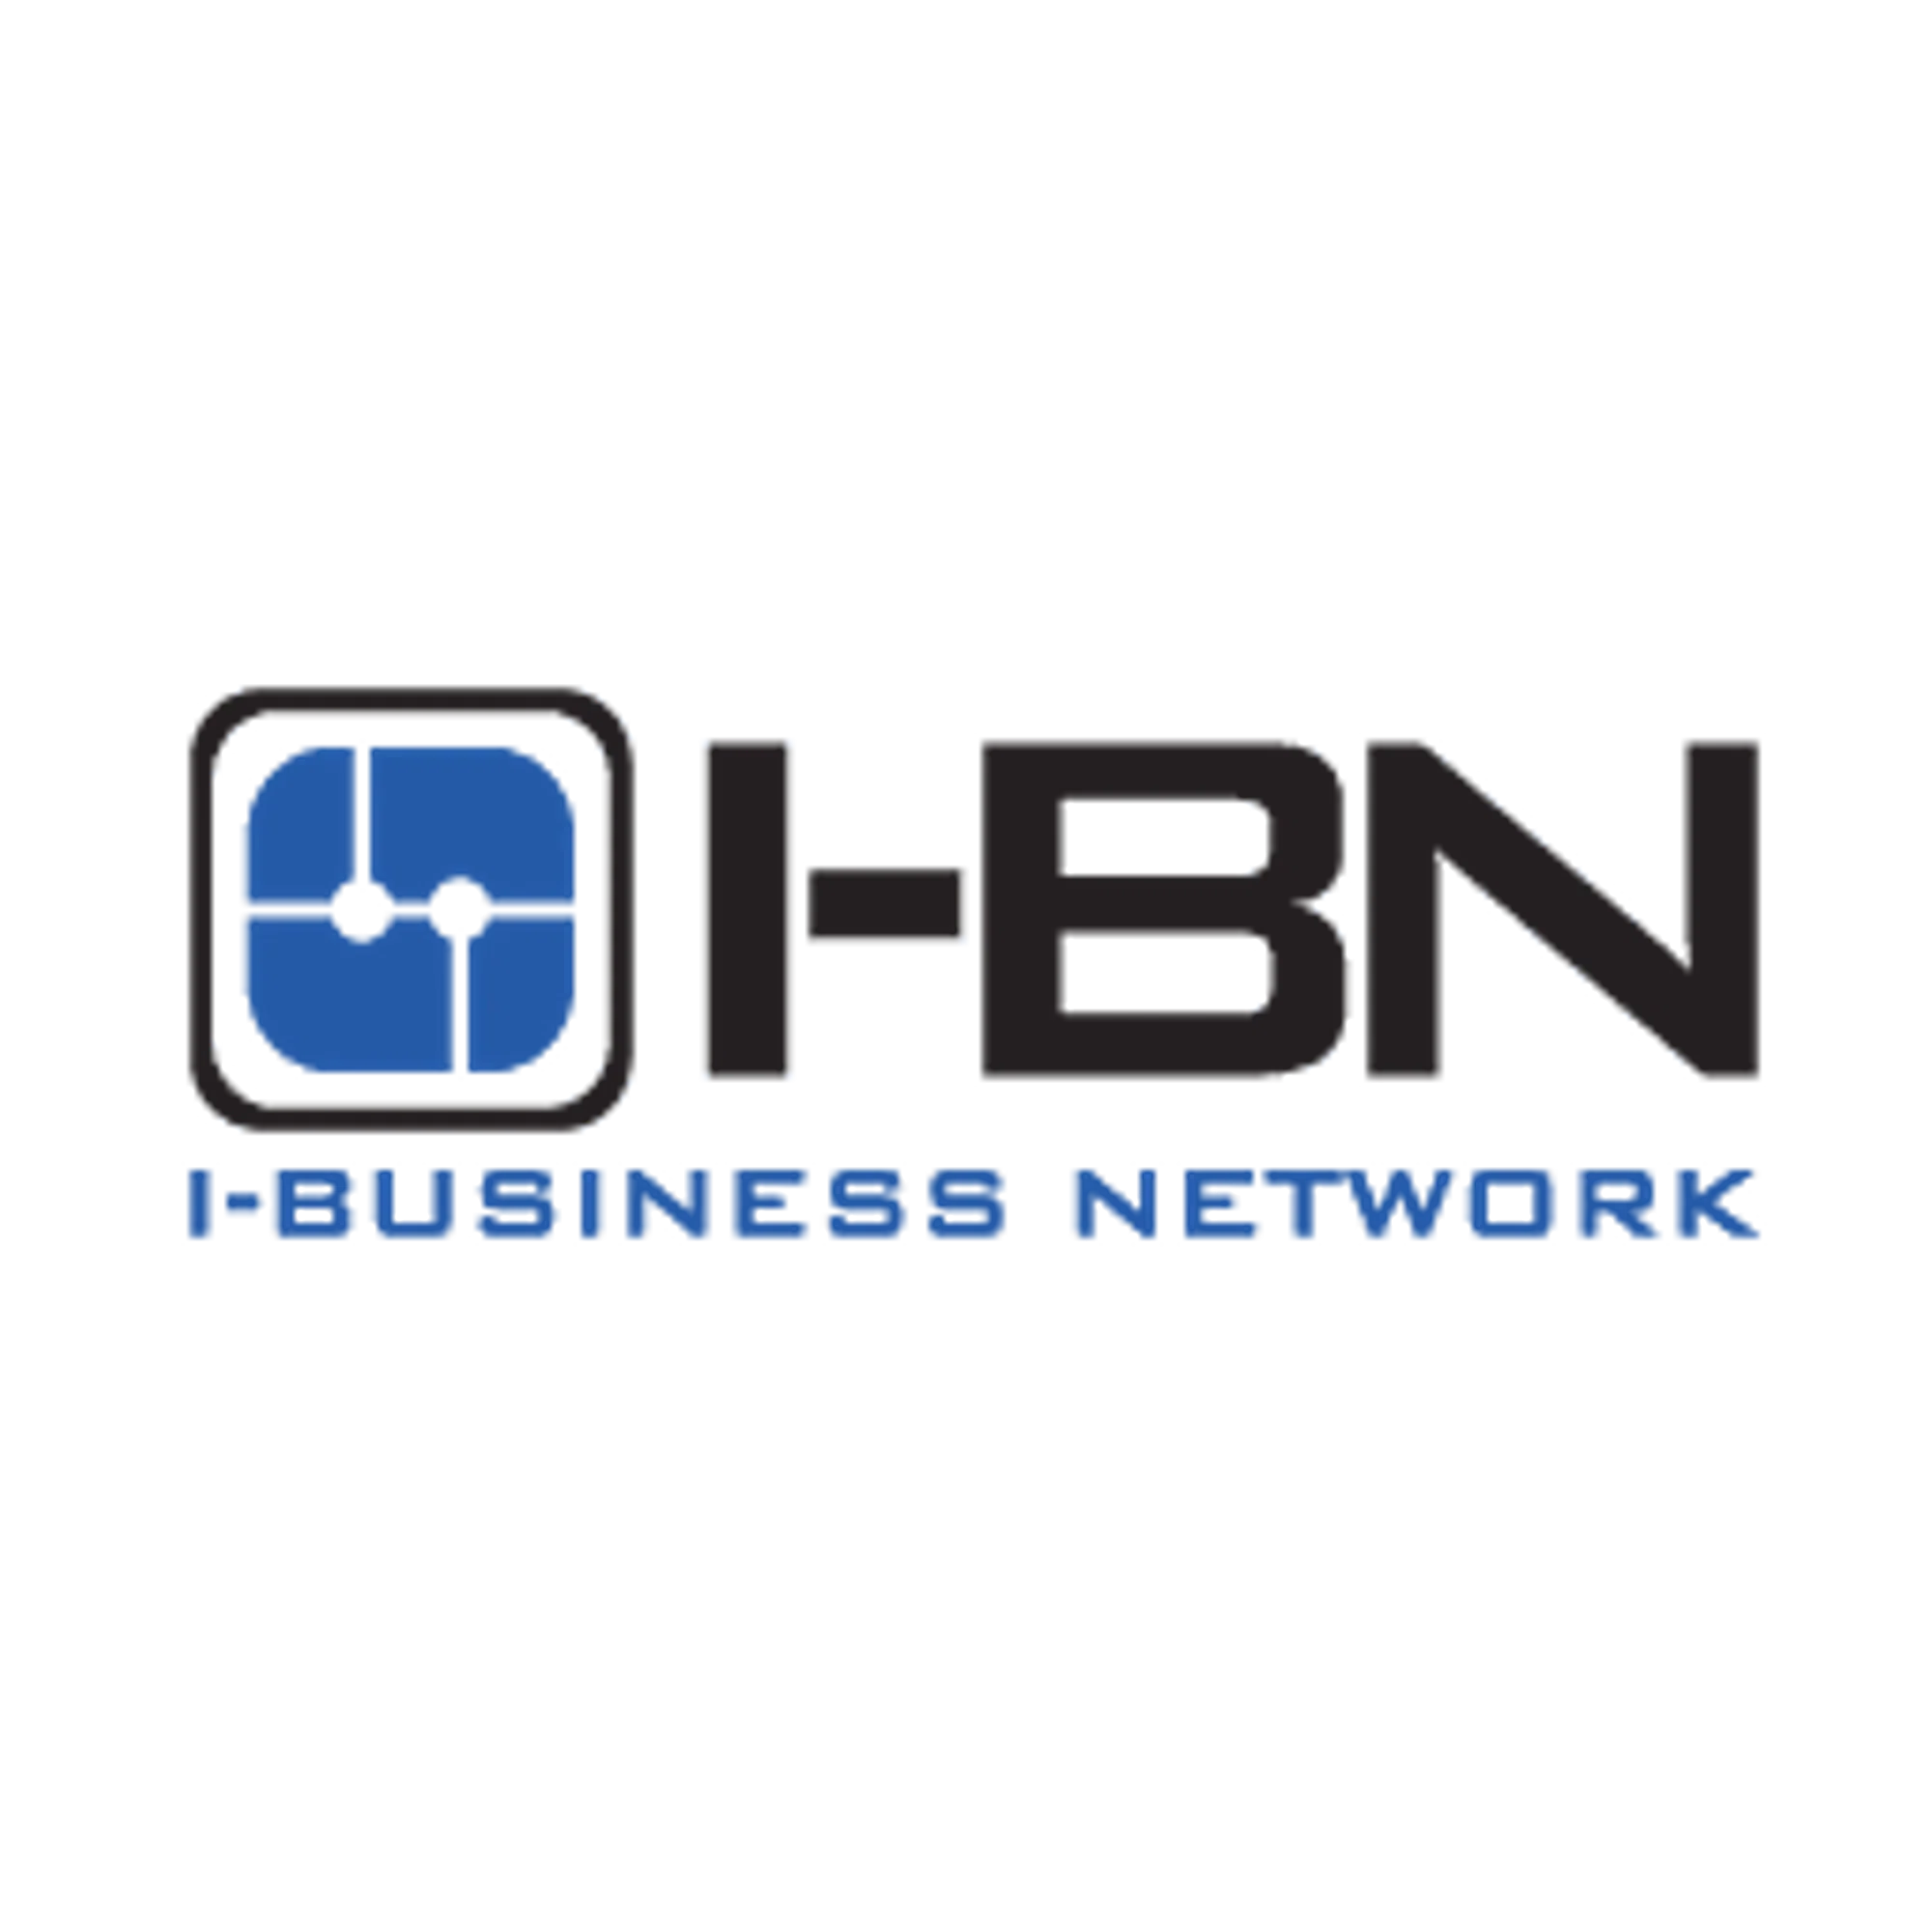 I-Business Network